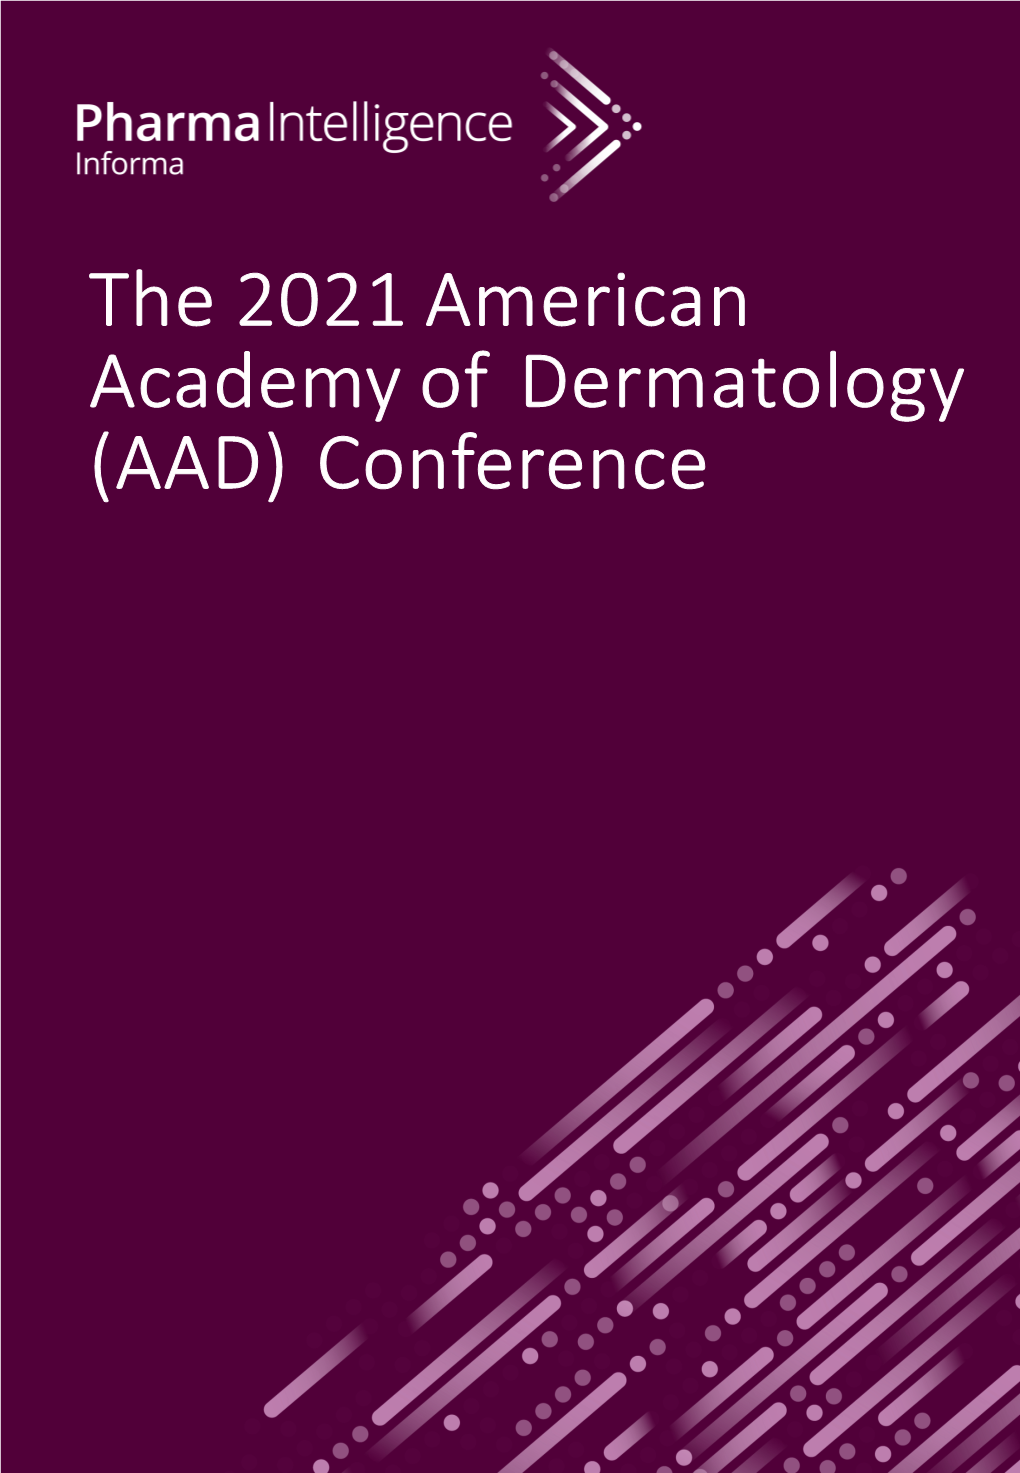 The 2021 American Academy of Dermatology (AAD) Conference 2021 AAD Conference Day 2 Update - Saturday April 24, 2021